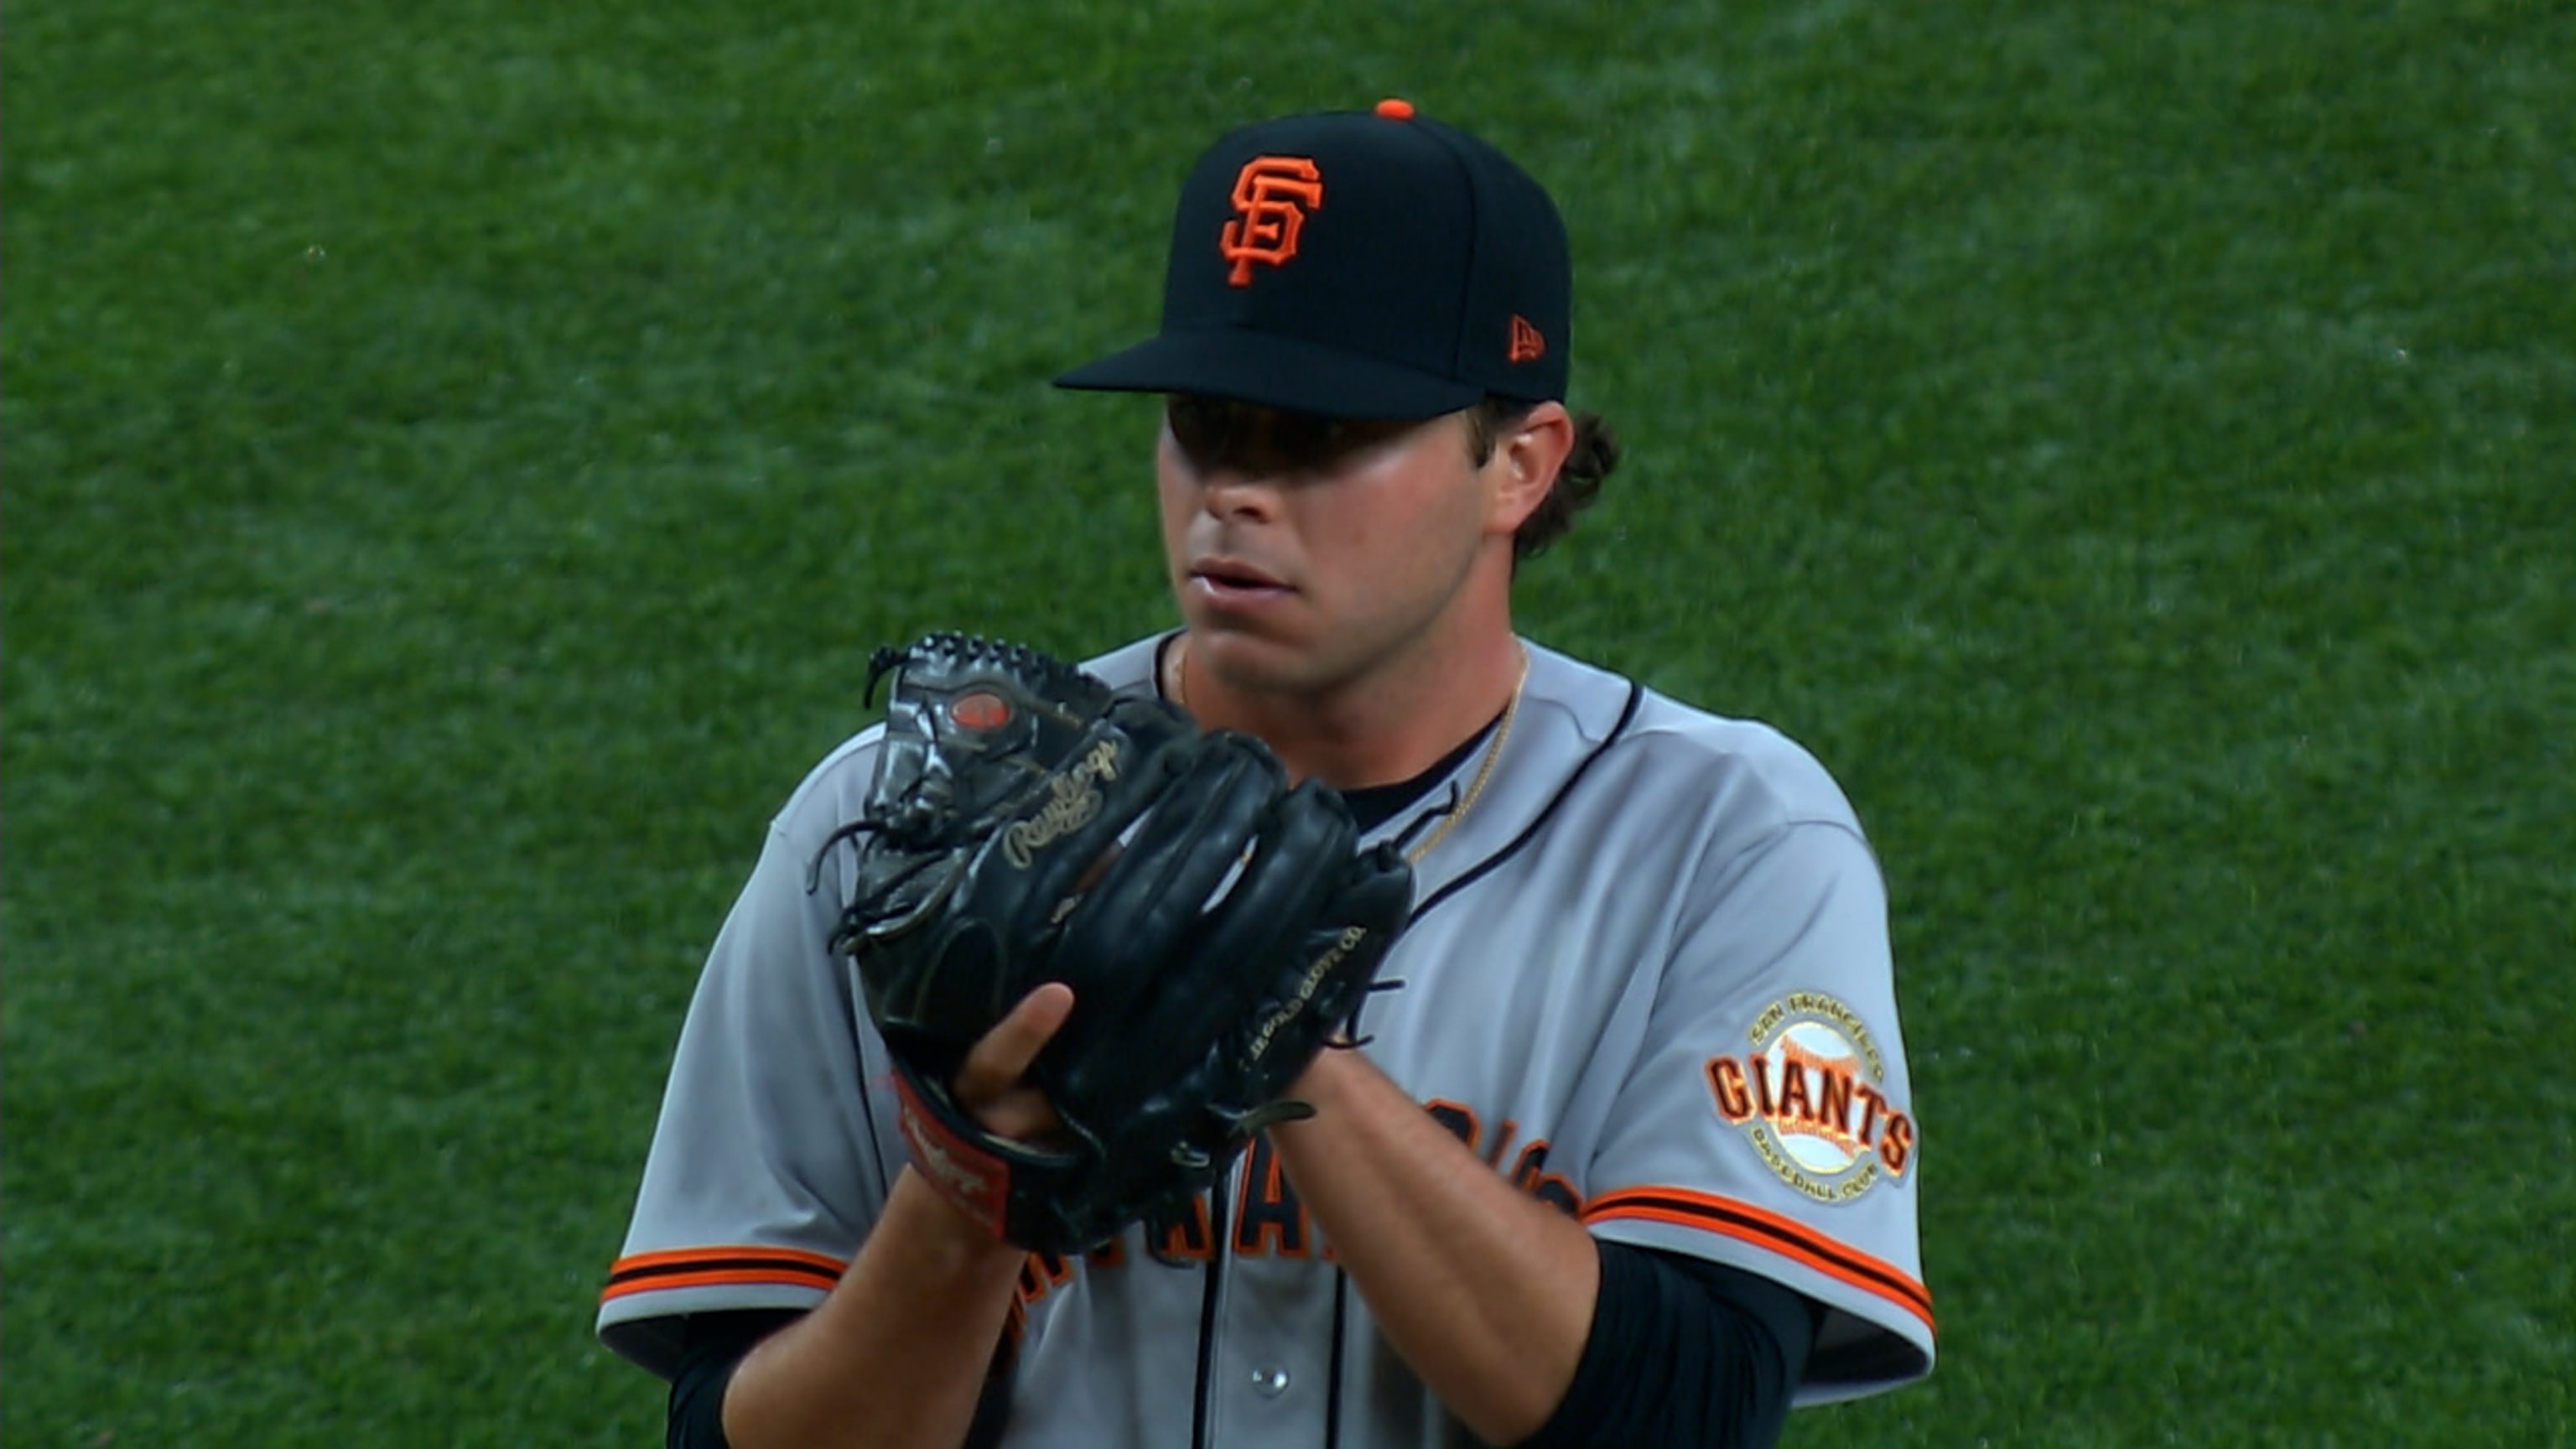 Sammy Long strikes out 7 in debut, Giants lose in 11 innings